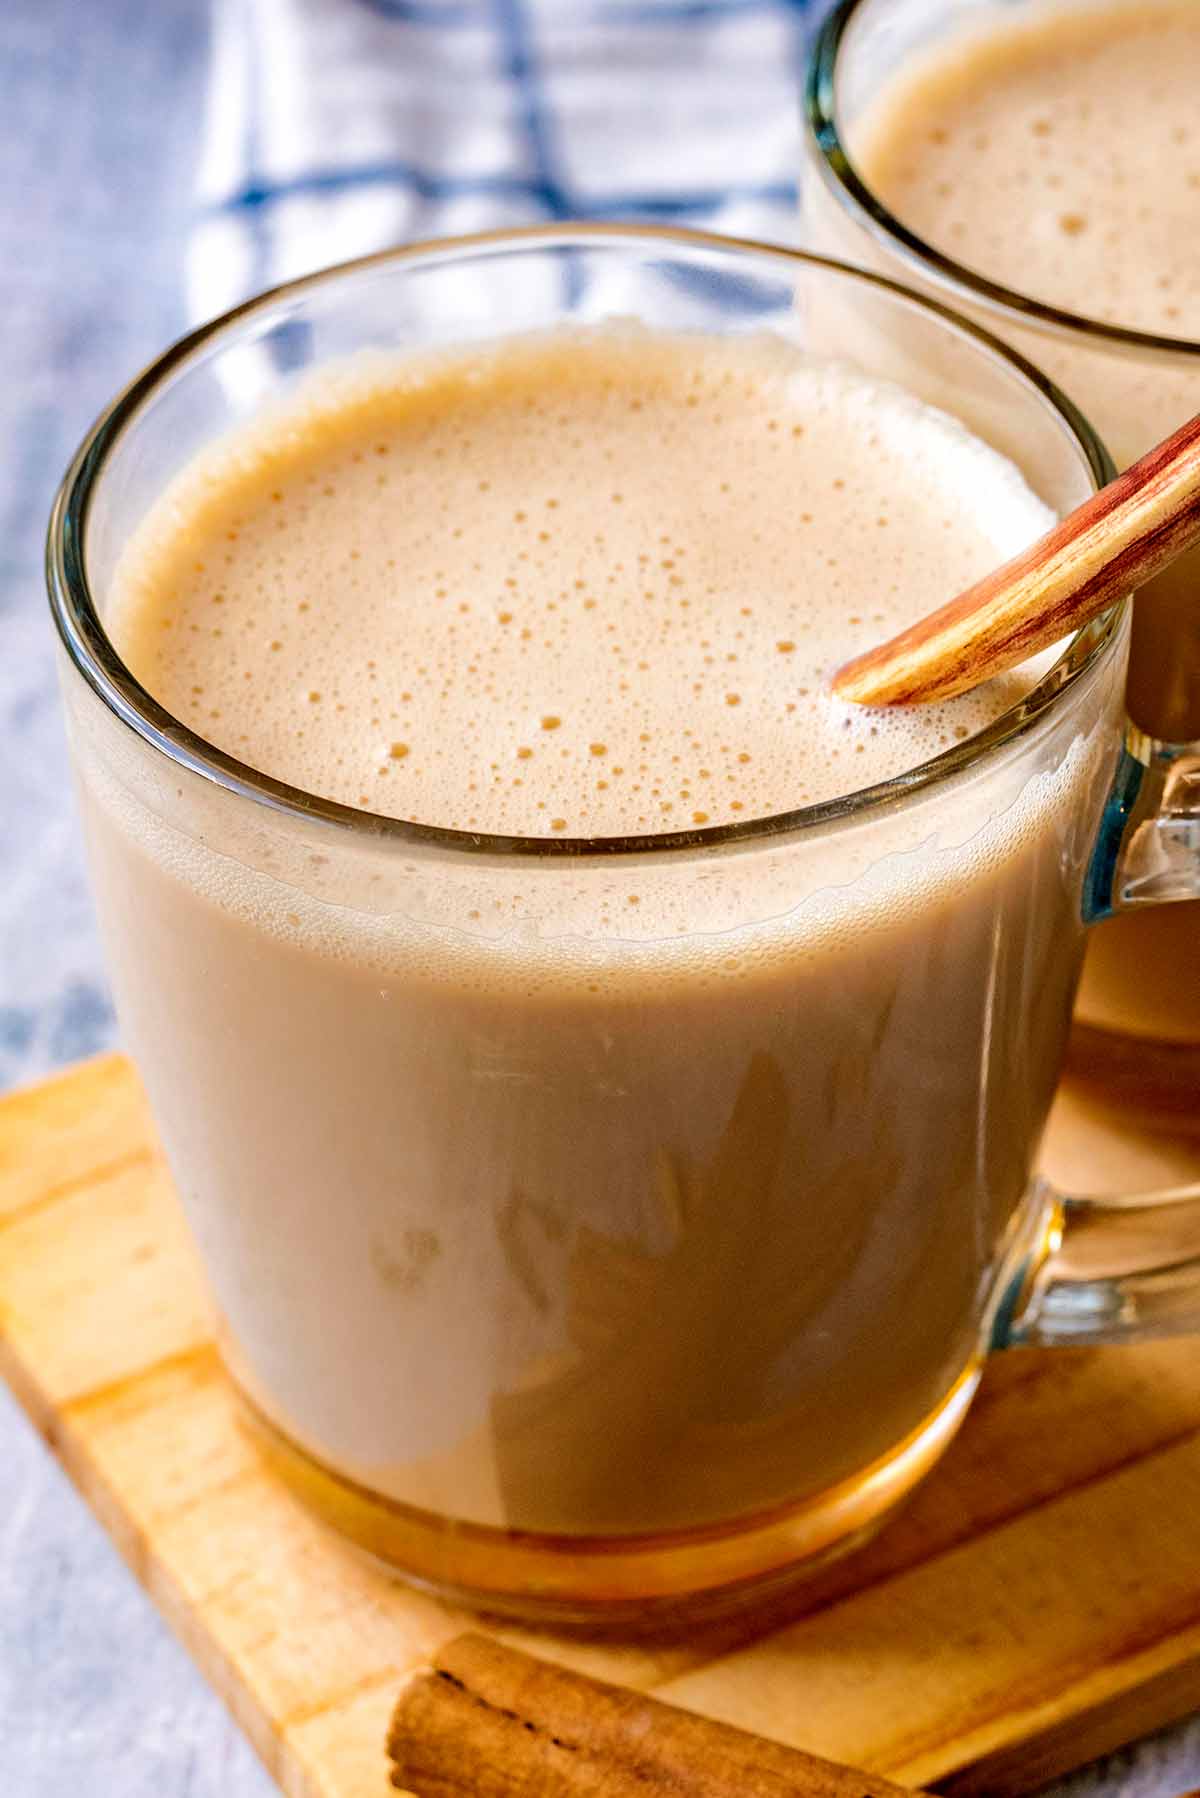 A glass of frothy latte with a spoon in it.